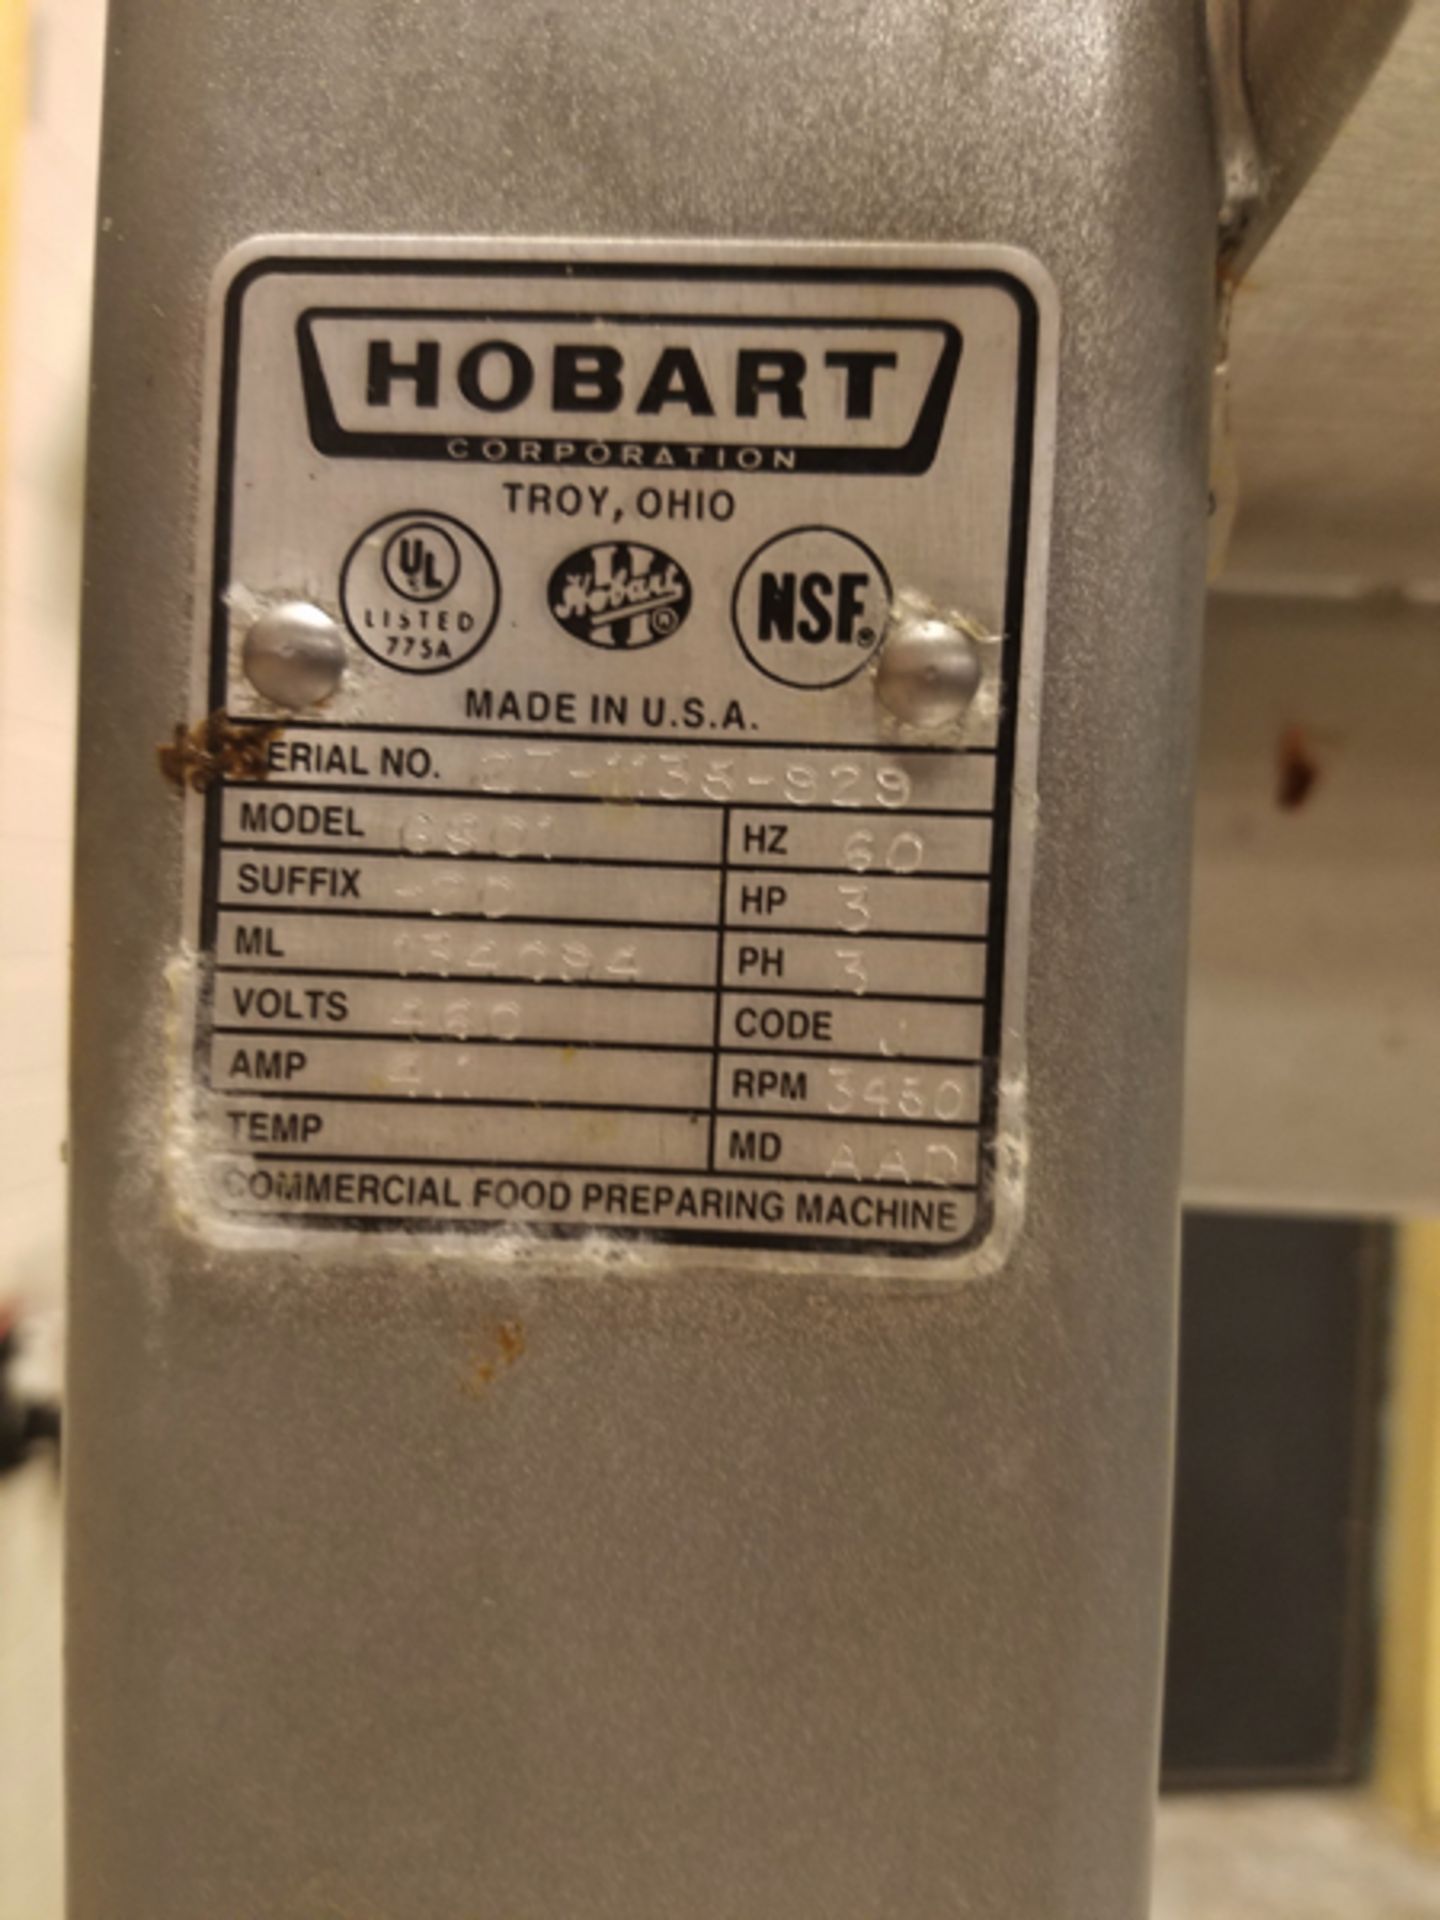 Hobart Stainelss Steel Bandsaw, M# 6801, S/N 27-1135-929 | Rigging Price: $100 - Image 2 of 2